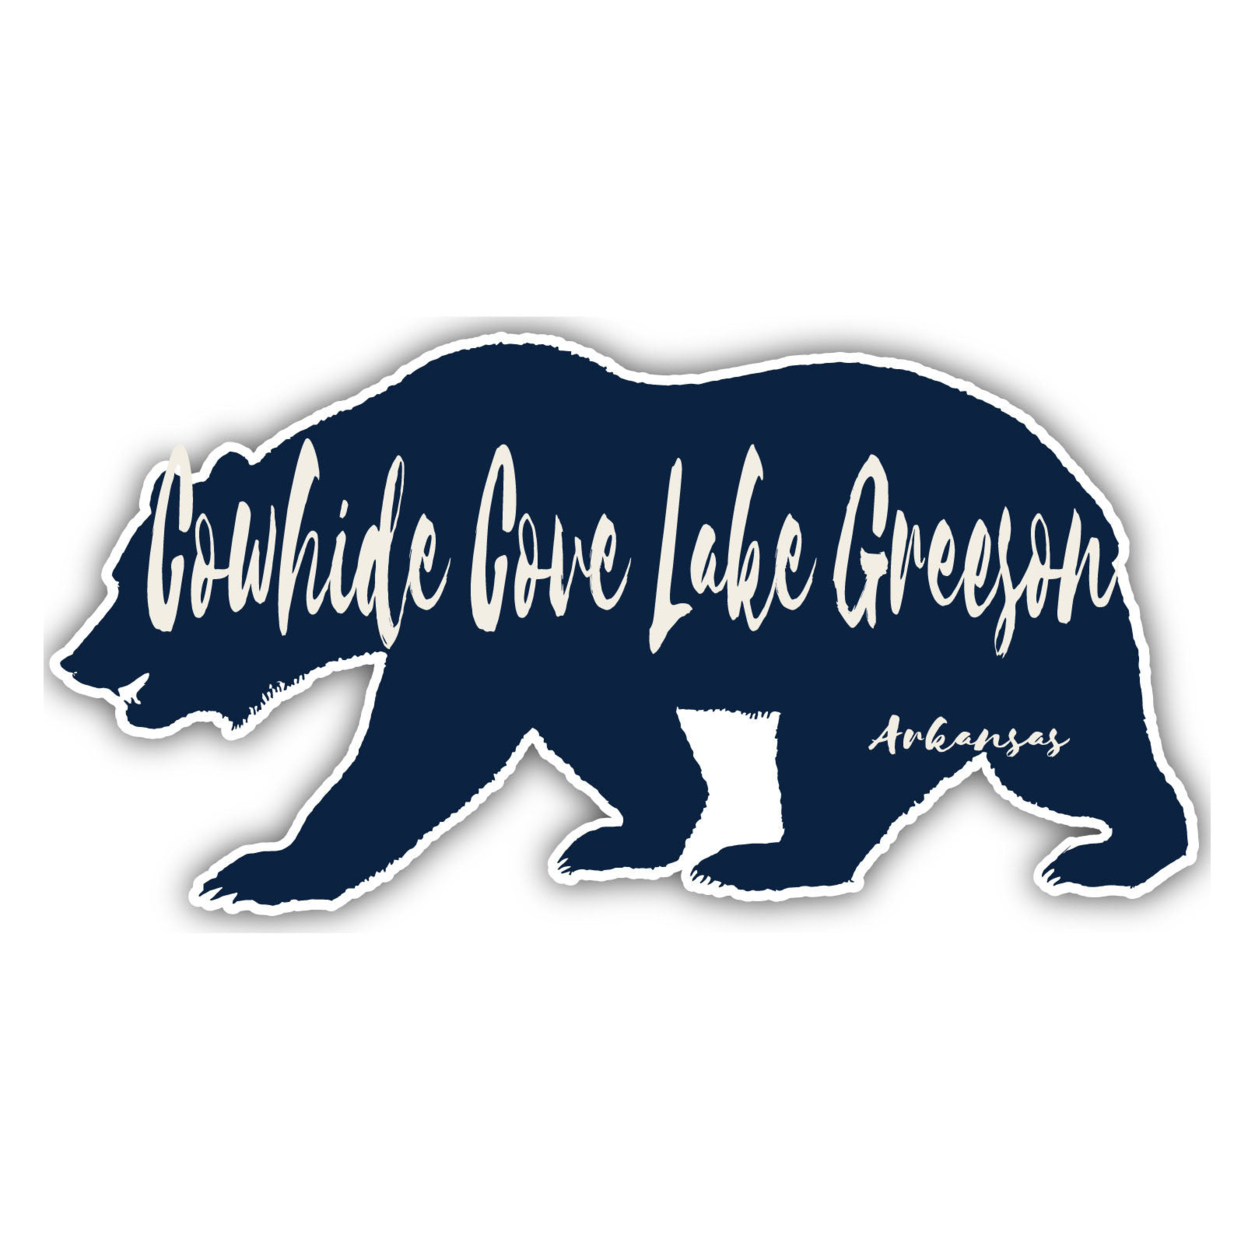 Cowhide Cove Lake Greeson Arkansas Souvenir Decorative Stickers (Choose Theme And Size) - 4-Pack, 4-Inch, Camp Life